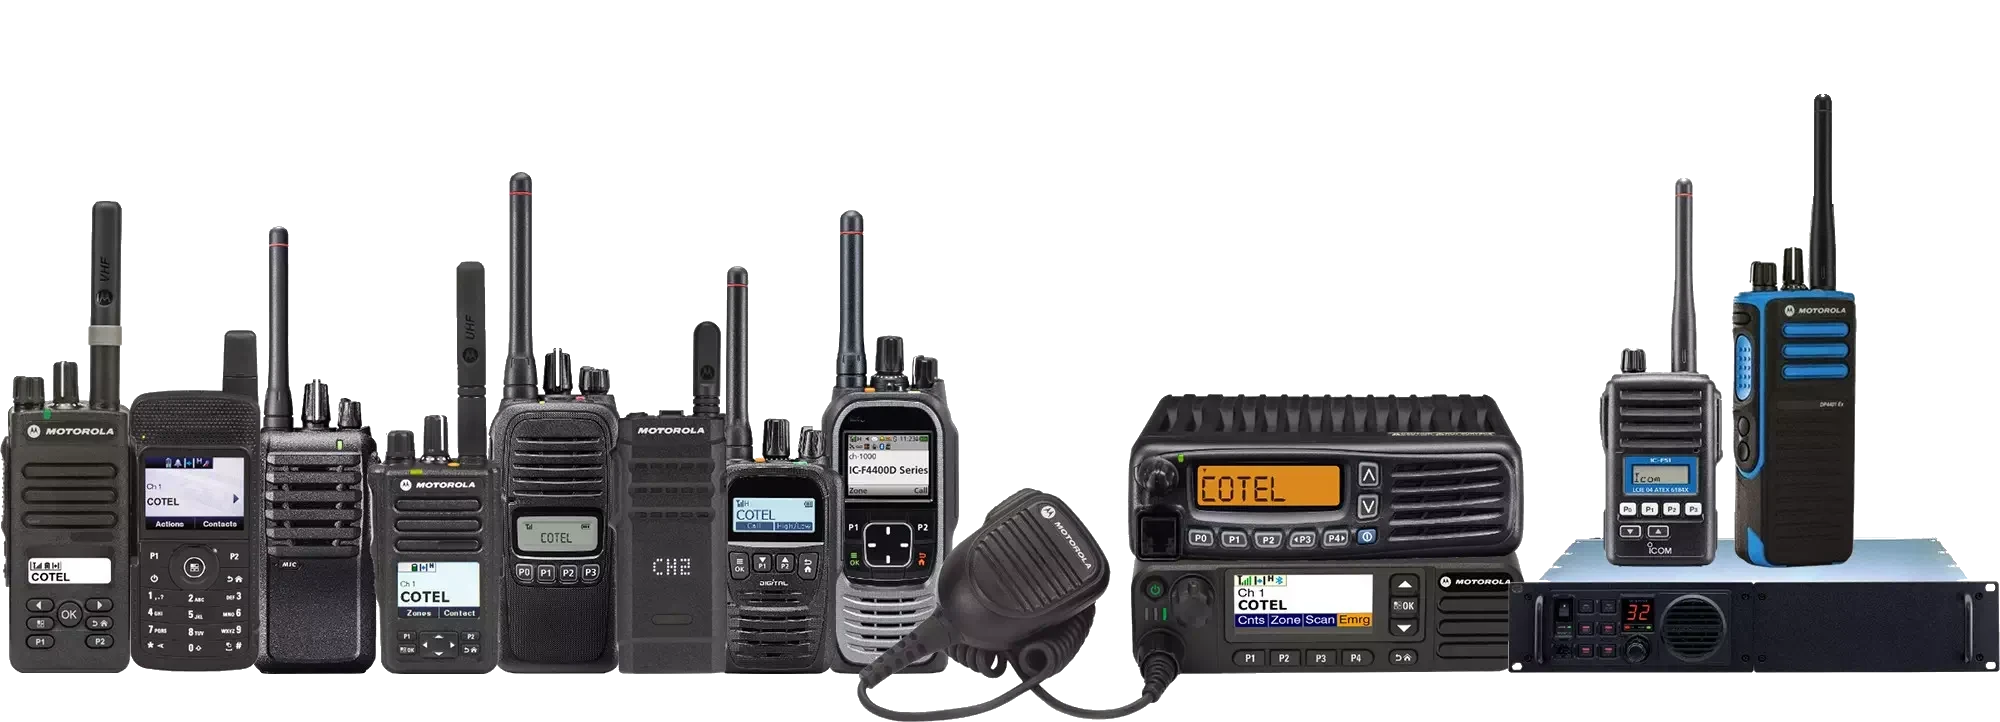 Whatever your requirements, basic of complex, Cotel have a range of radio equipment and experience to suit your needs.